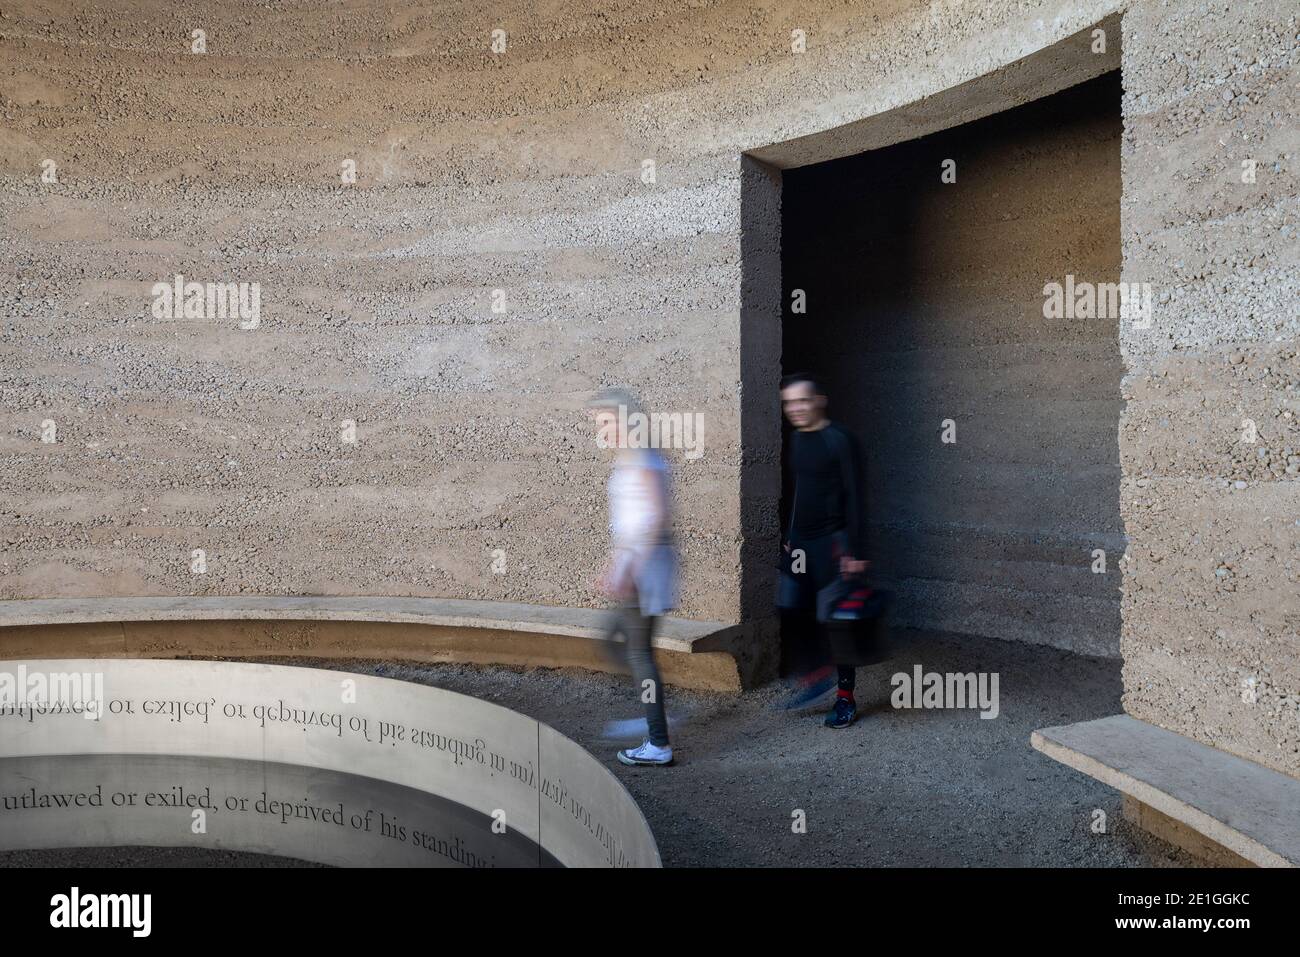 Interior view of Writ in Water, an architectural artwork by Mark Wallinger, in collaboration with Studio Octopi, at Runnymede, Surrey, UK, commissioned by the National Trust to celebrate the enduring significance of Magna Carta. Stock Photo